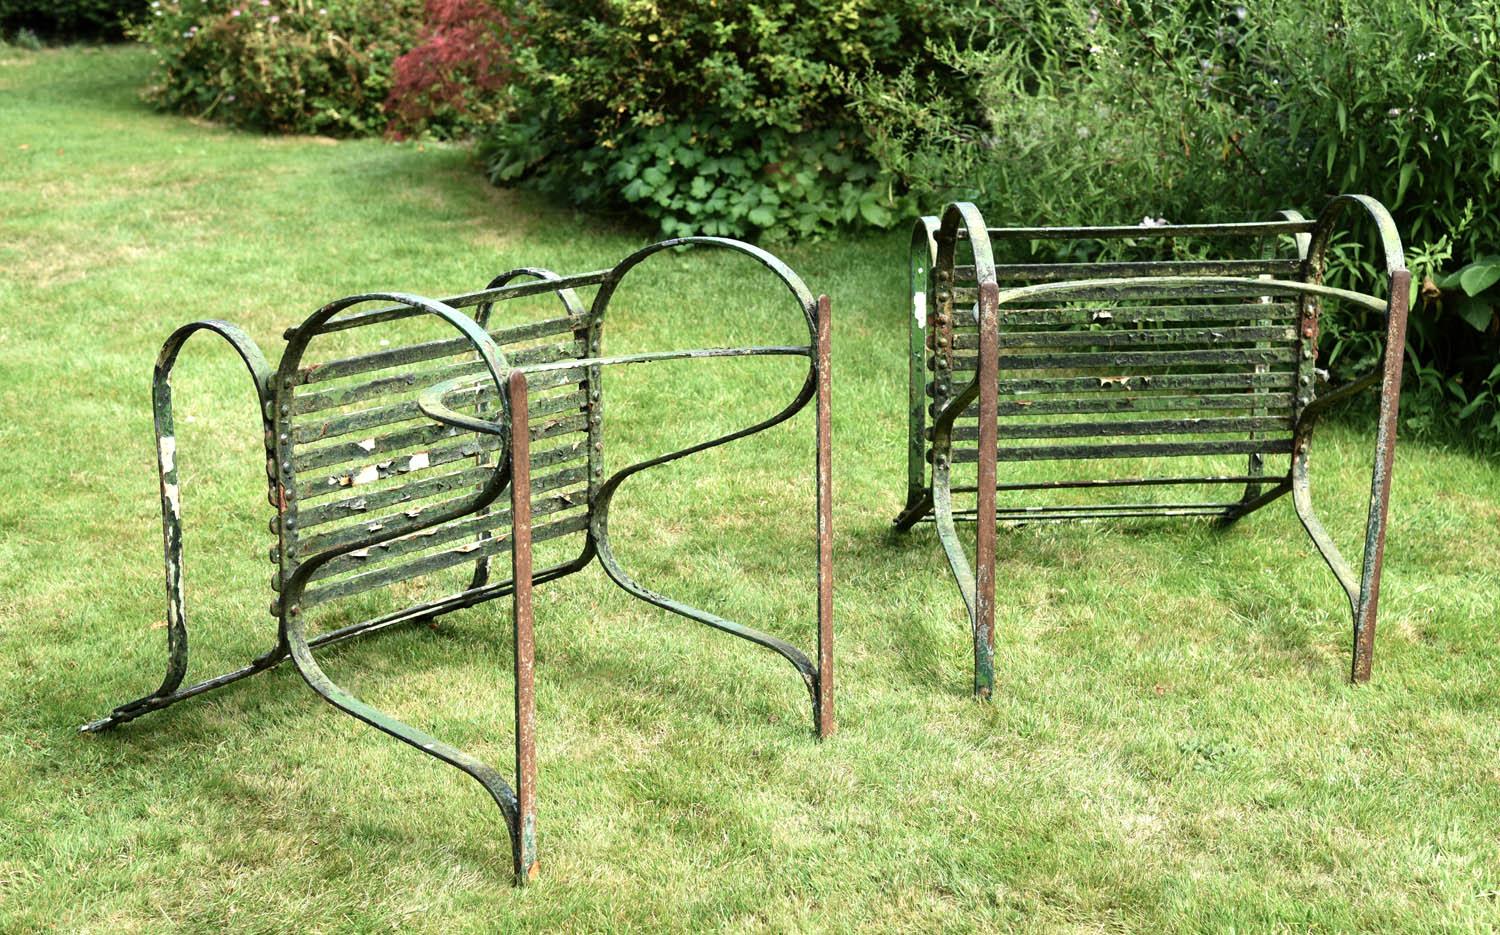 A fine and rare pair of English Regency period wrought iron garden armchairs, each with three strap back rails over a seat supported by 's' curved side frames and a bow-arched stretcher.
Showing a multitude of ancient coats of paint and many years